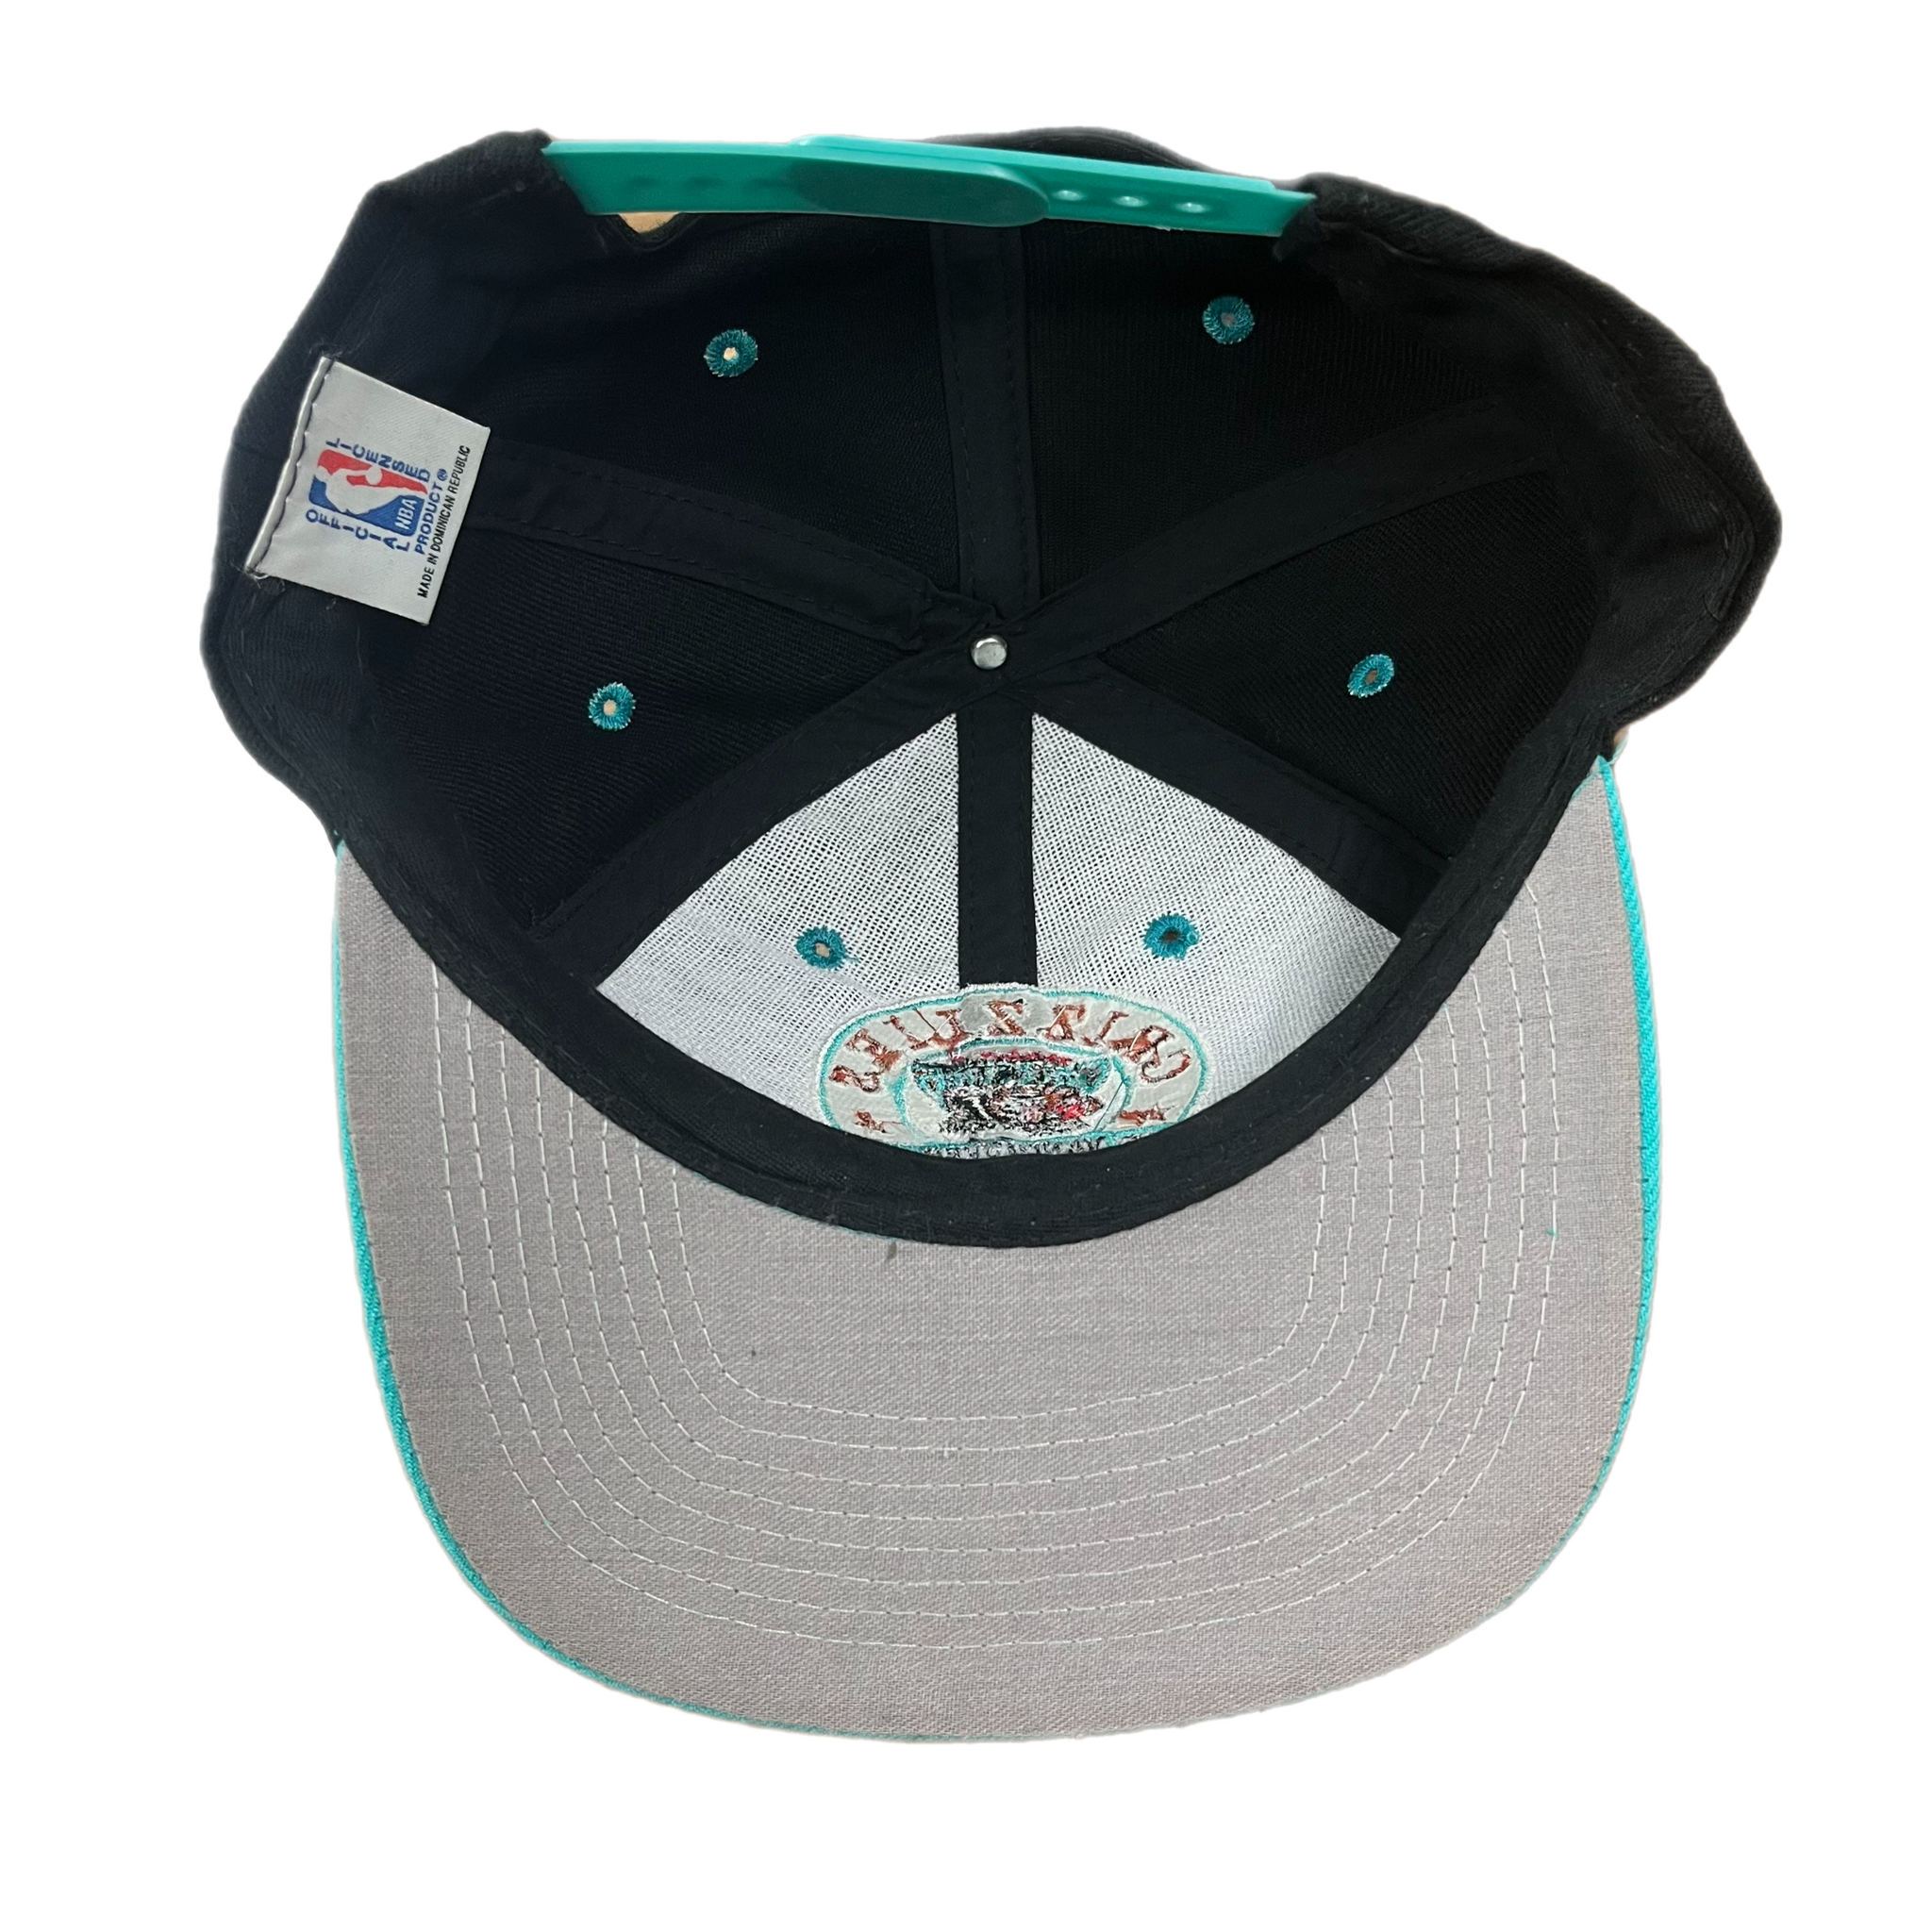 Vintage New Era Vancouver Grizzlies Fitted Hat